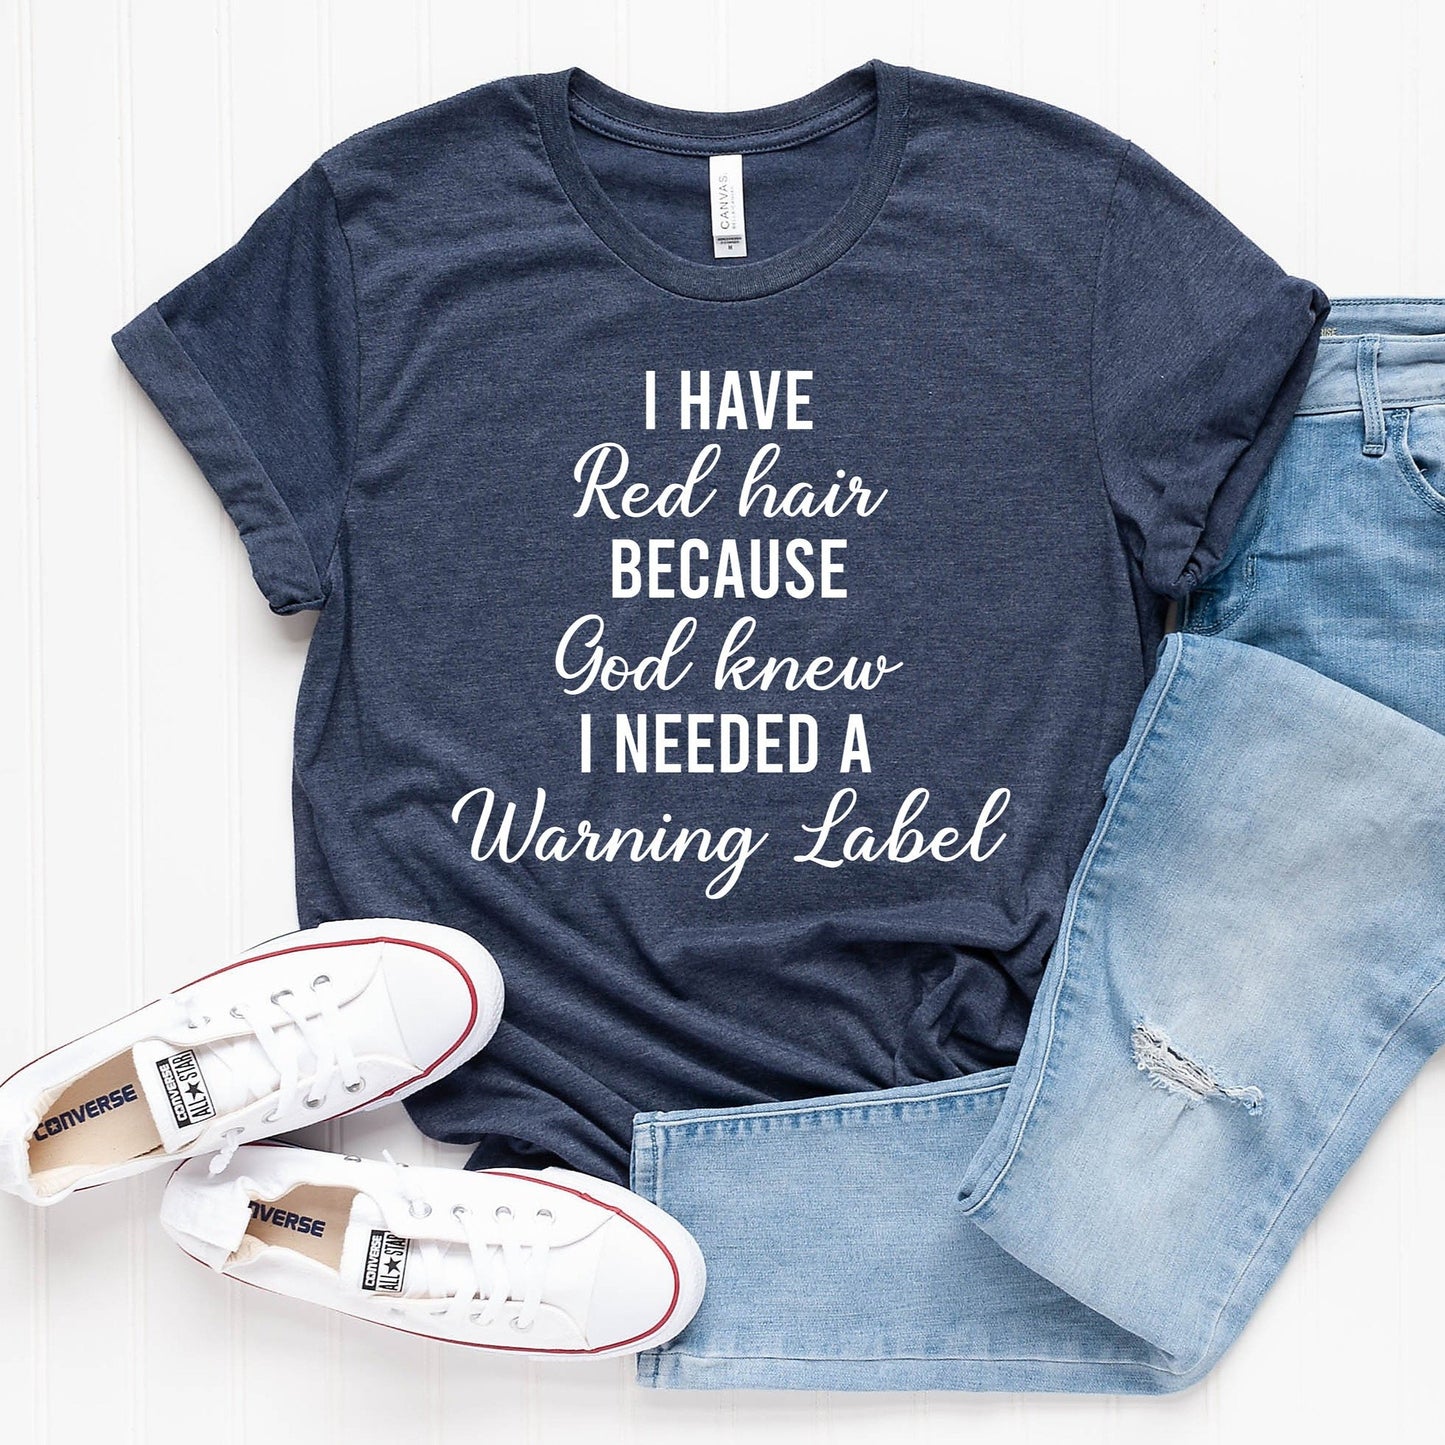 I Have Red Hair Because God knew I Needed a Warning Label T-Shirt